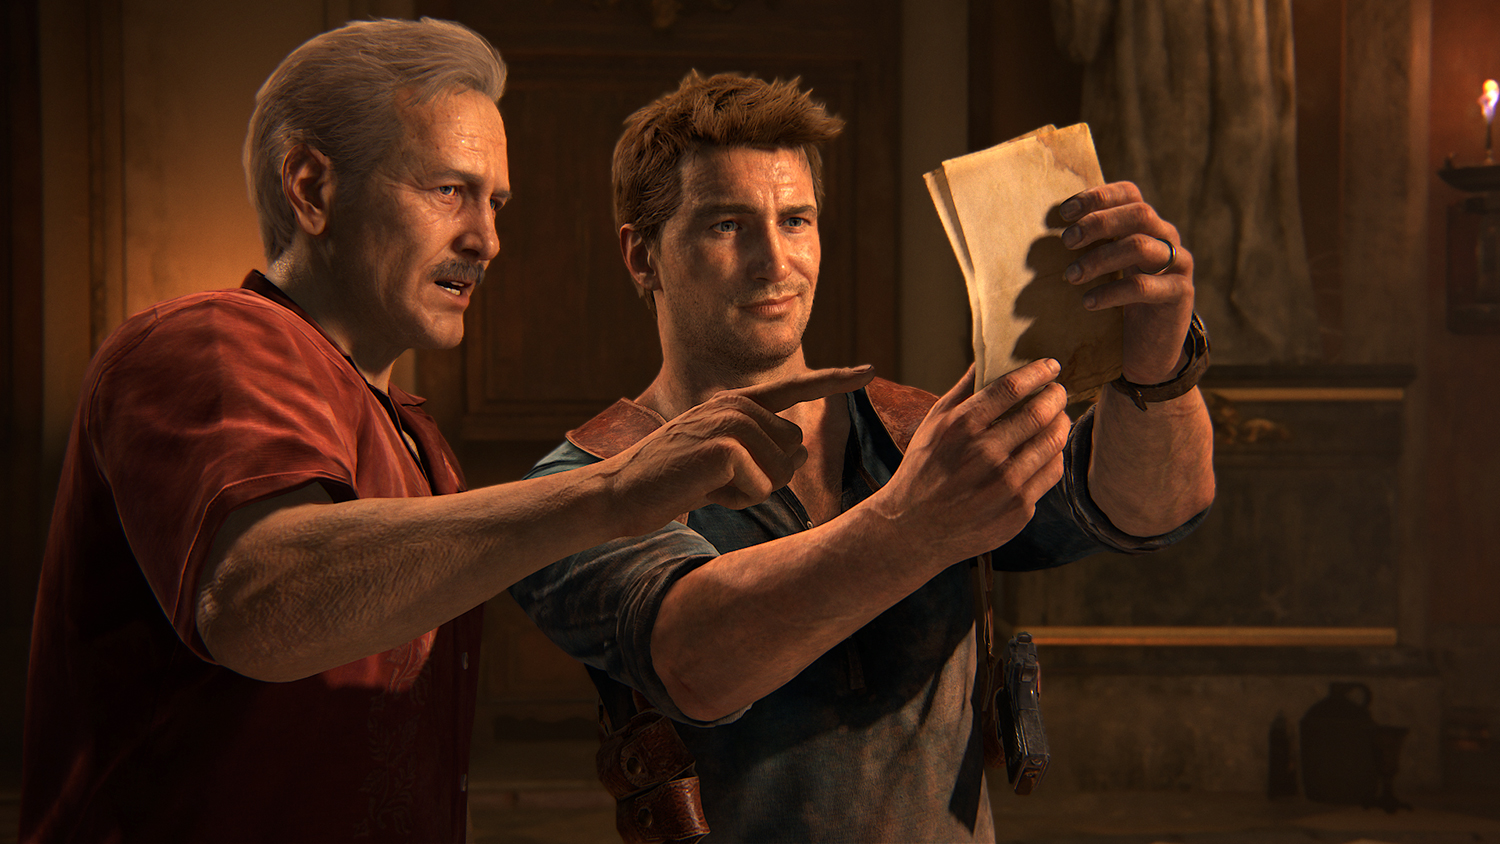 Chris Pratt turned down the role of Nathan Drake in the Uncharted movie